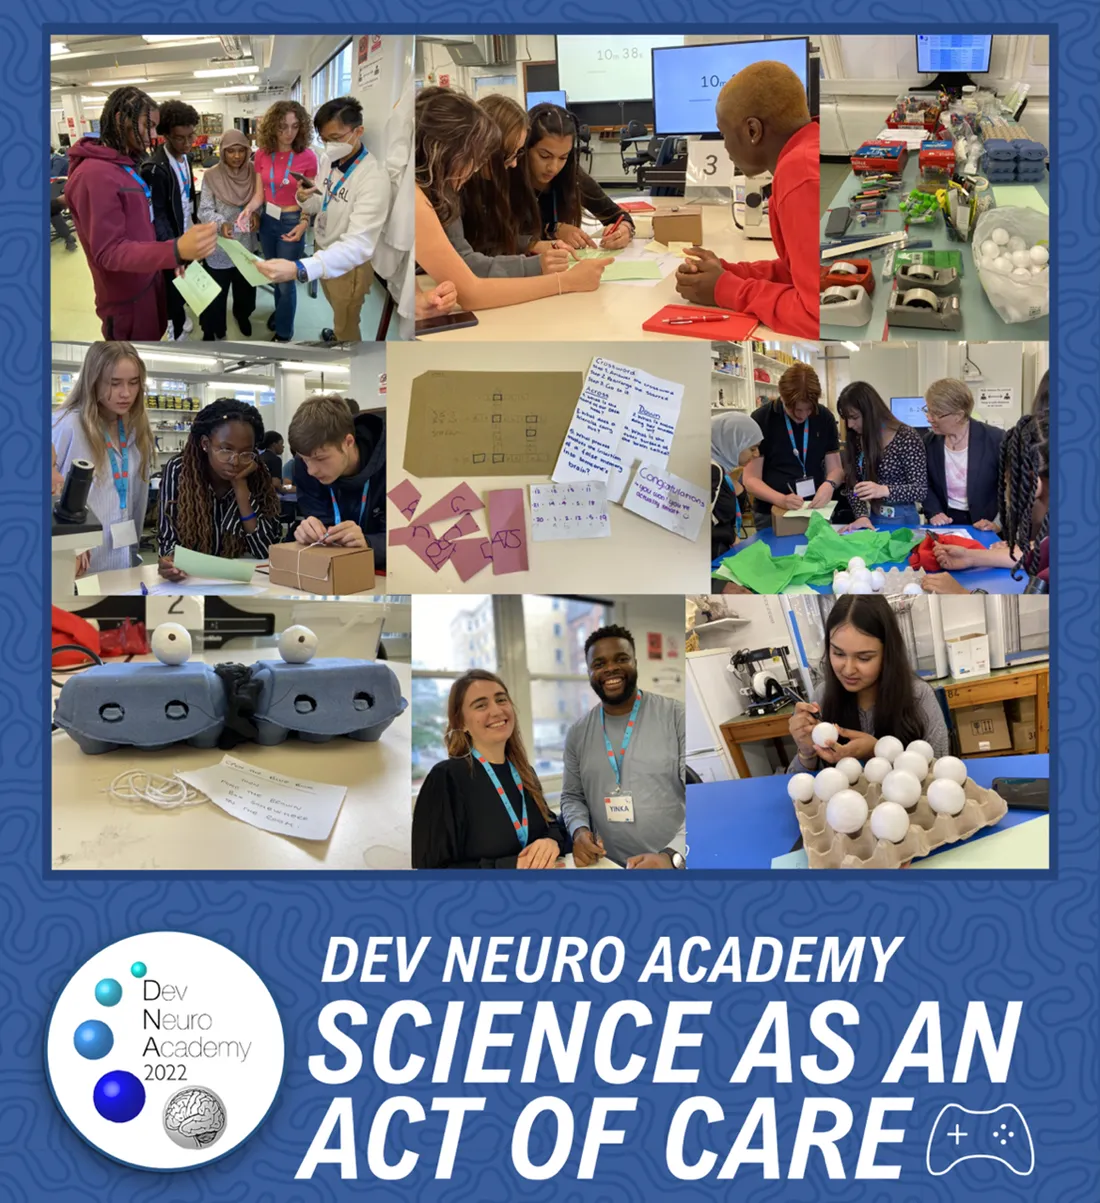 Dev Neuro Academy Science as an act of care